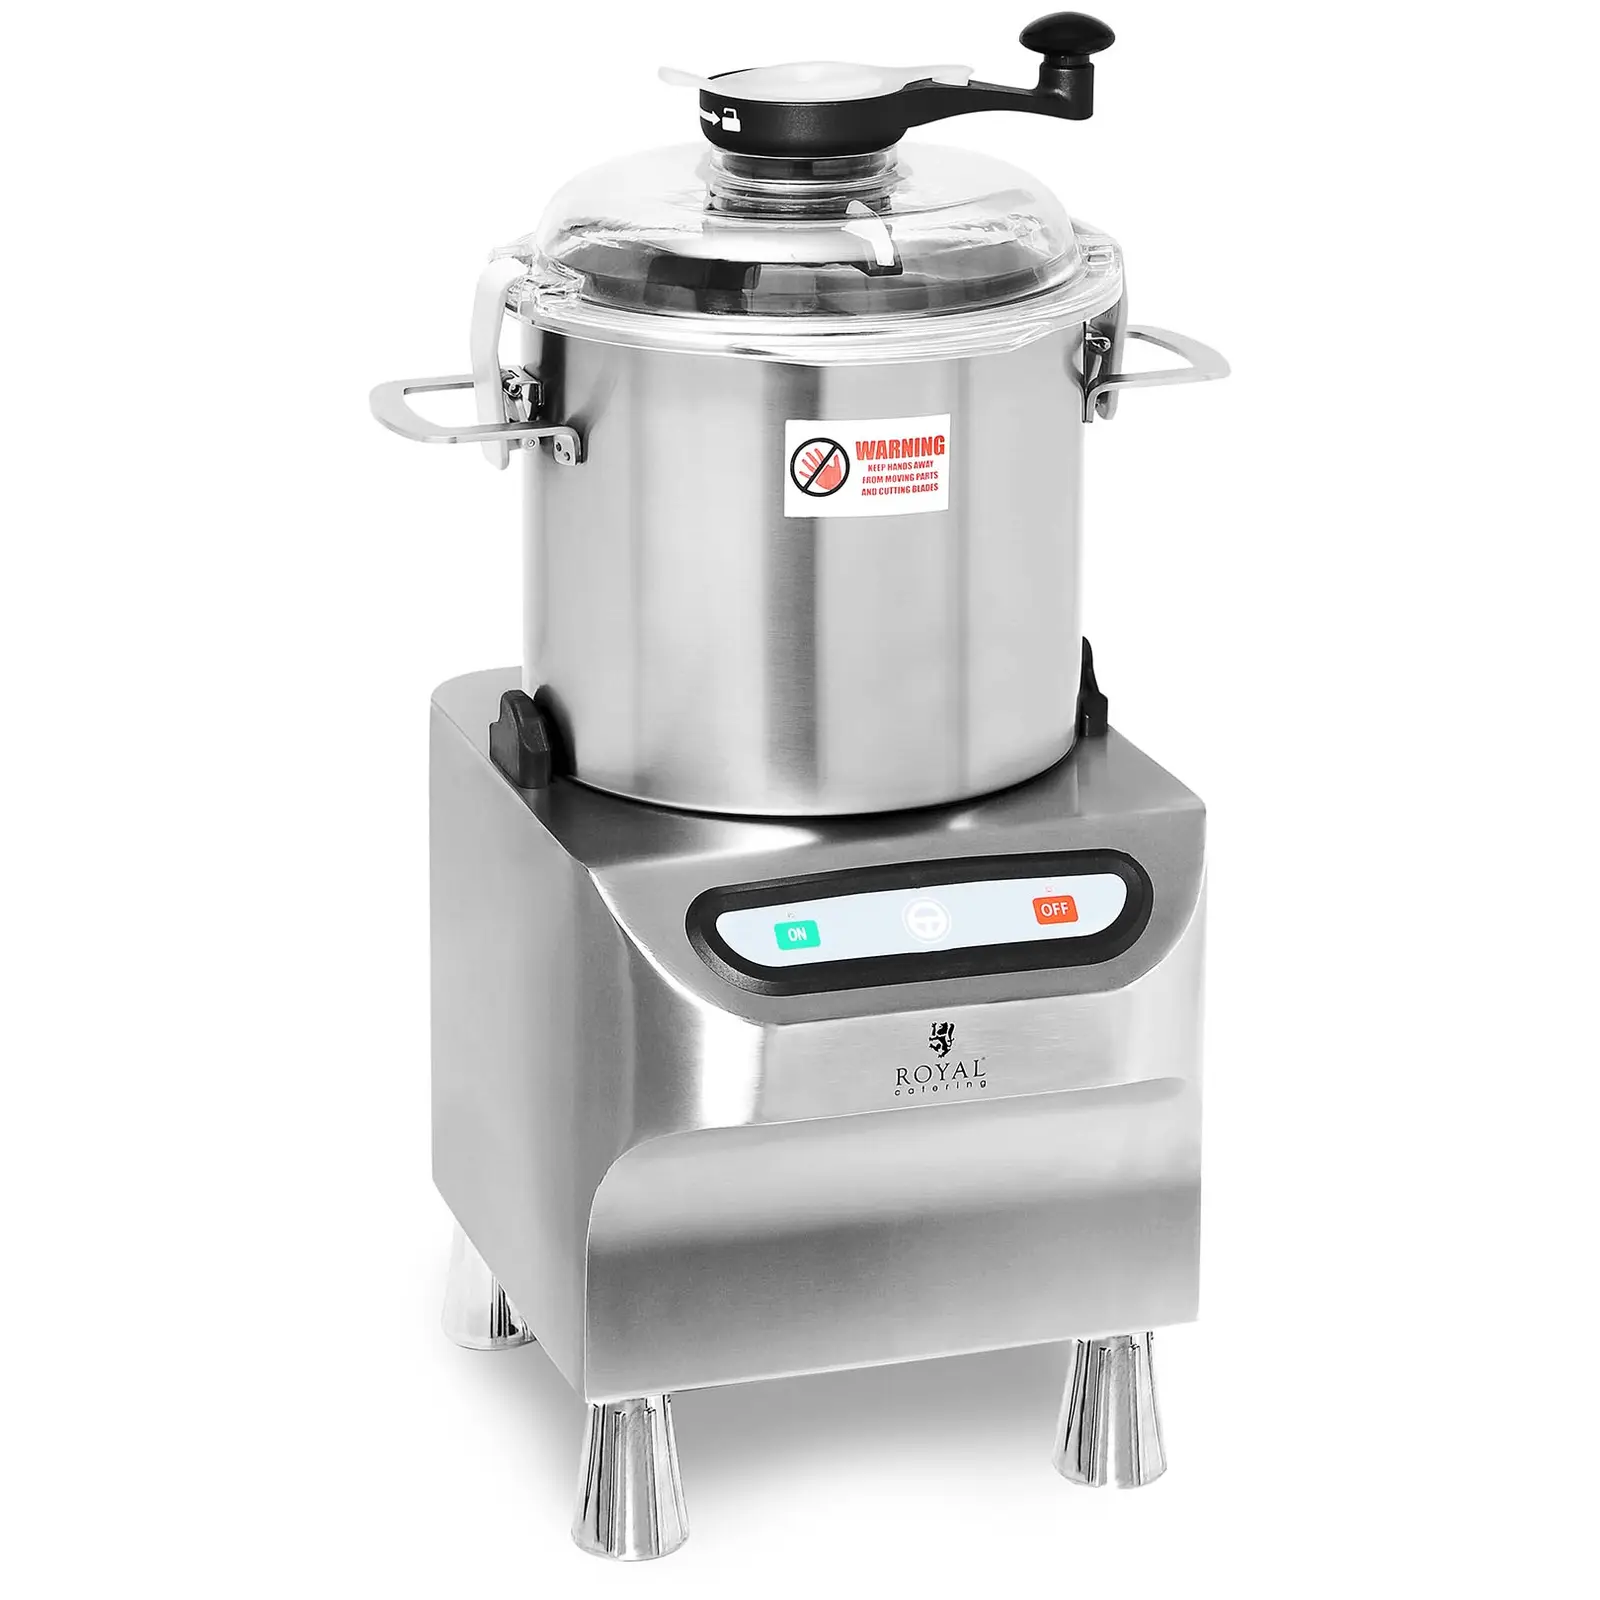 Bowl Cutter - 1500 rpm - Royal Catering - 8 L